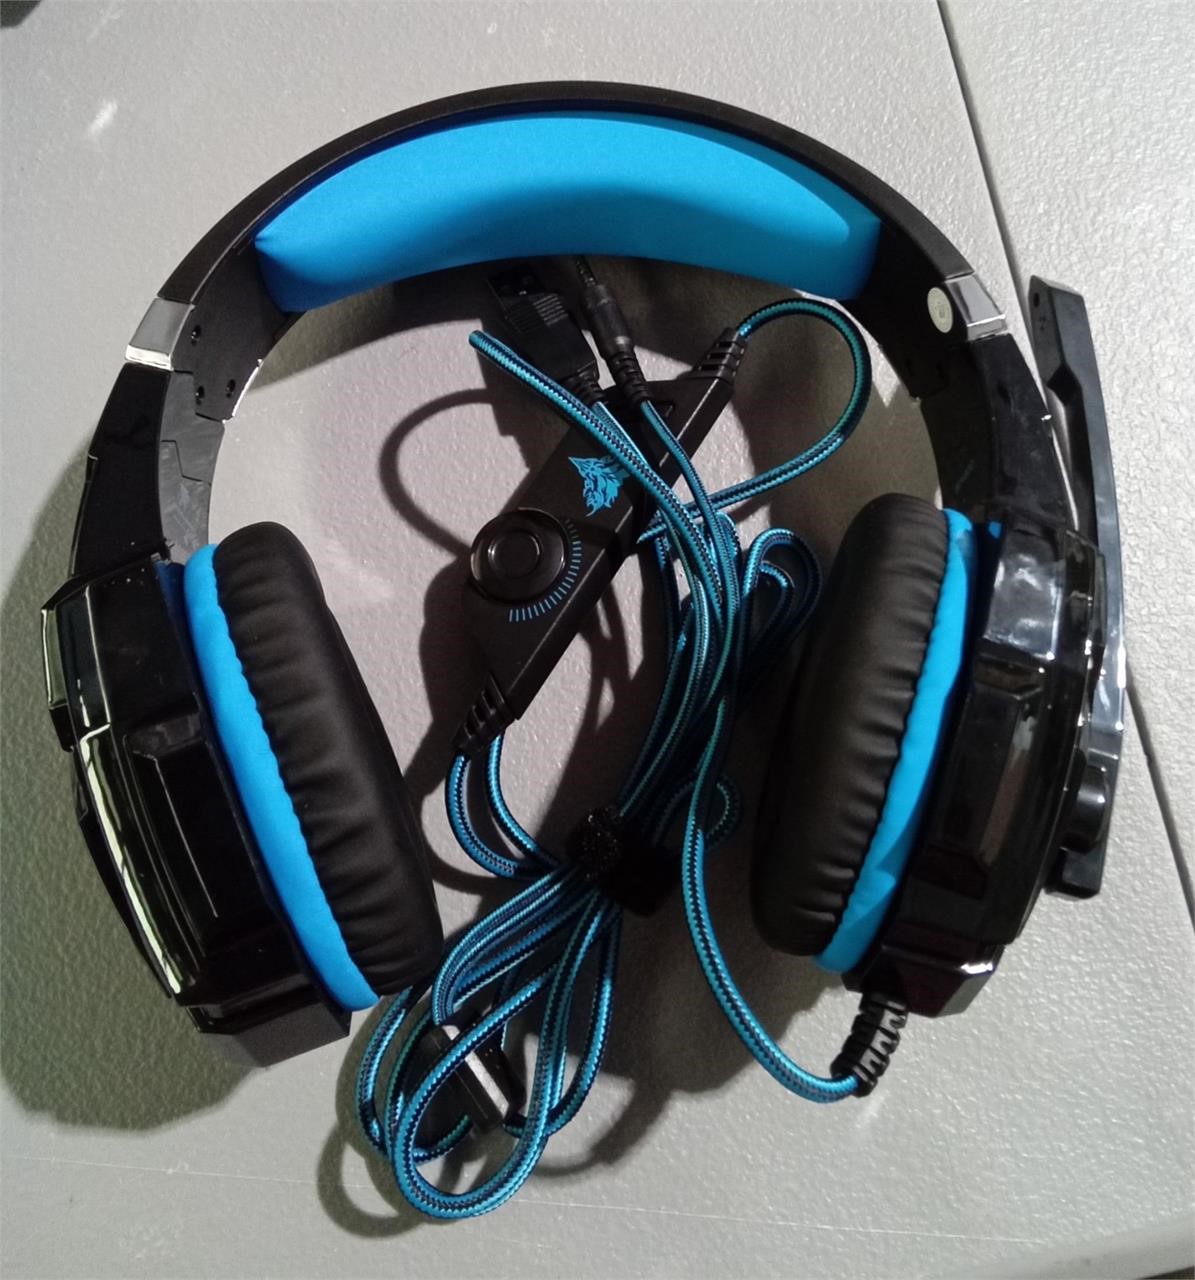 Gaming Headset - Blk/Blue